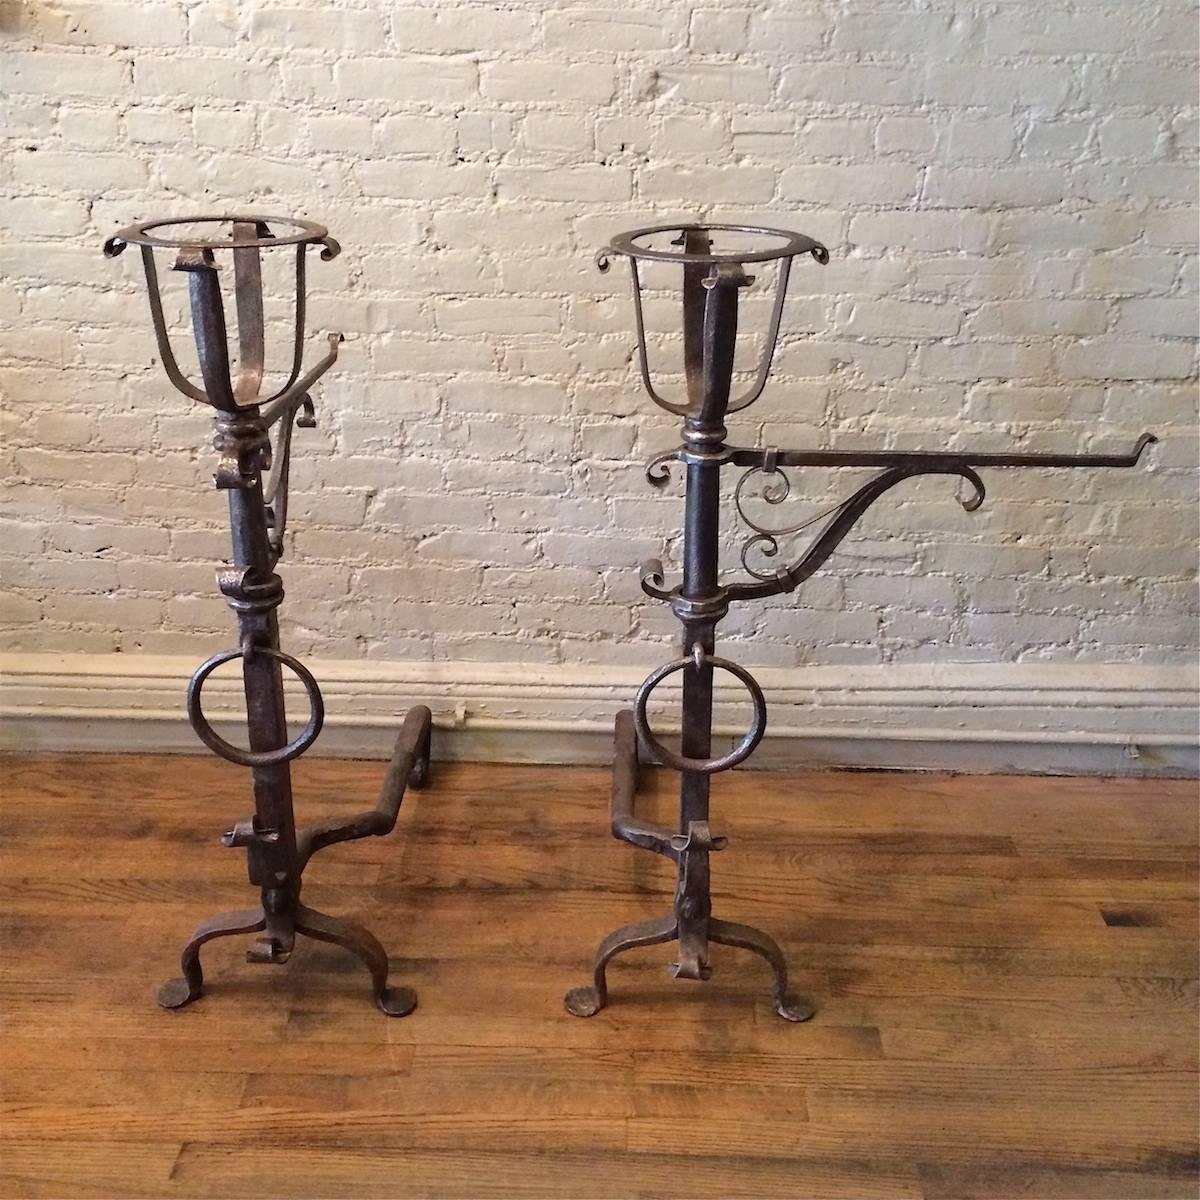 Pair of tall, impressive, 19th century, Gothic style, hand-wrought iron andirons in the style of Samuel Yellin with open basket finials, ring loops and decorative flourishes that are truly a statement for a fireplace.